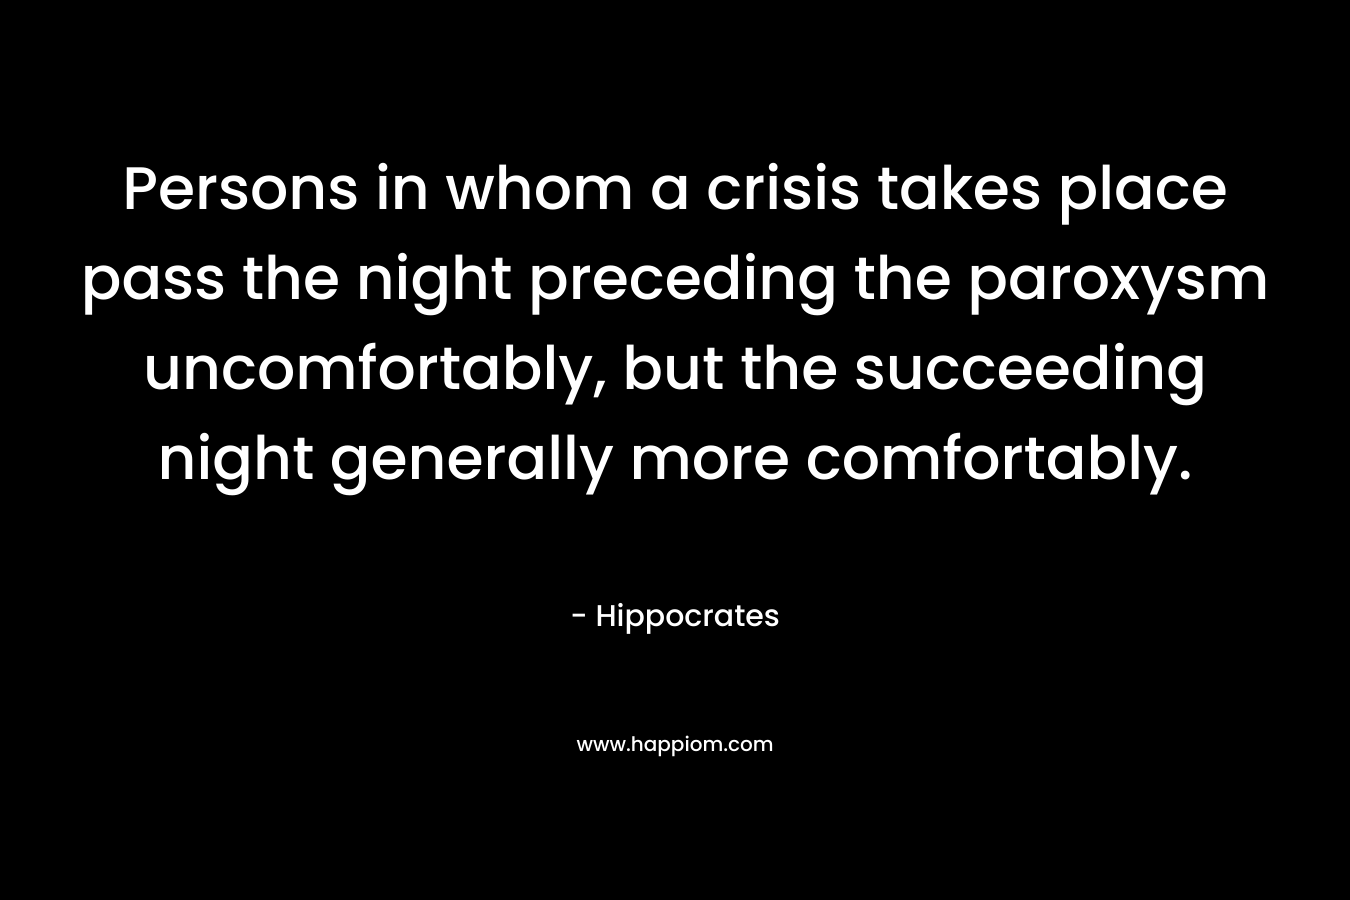 Persons in whom a crisis takes place pass the night preceding the paroxysm uncomfortably, but the succeeding night generally more comfortably. – Hippocrates